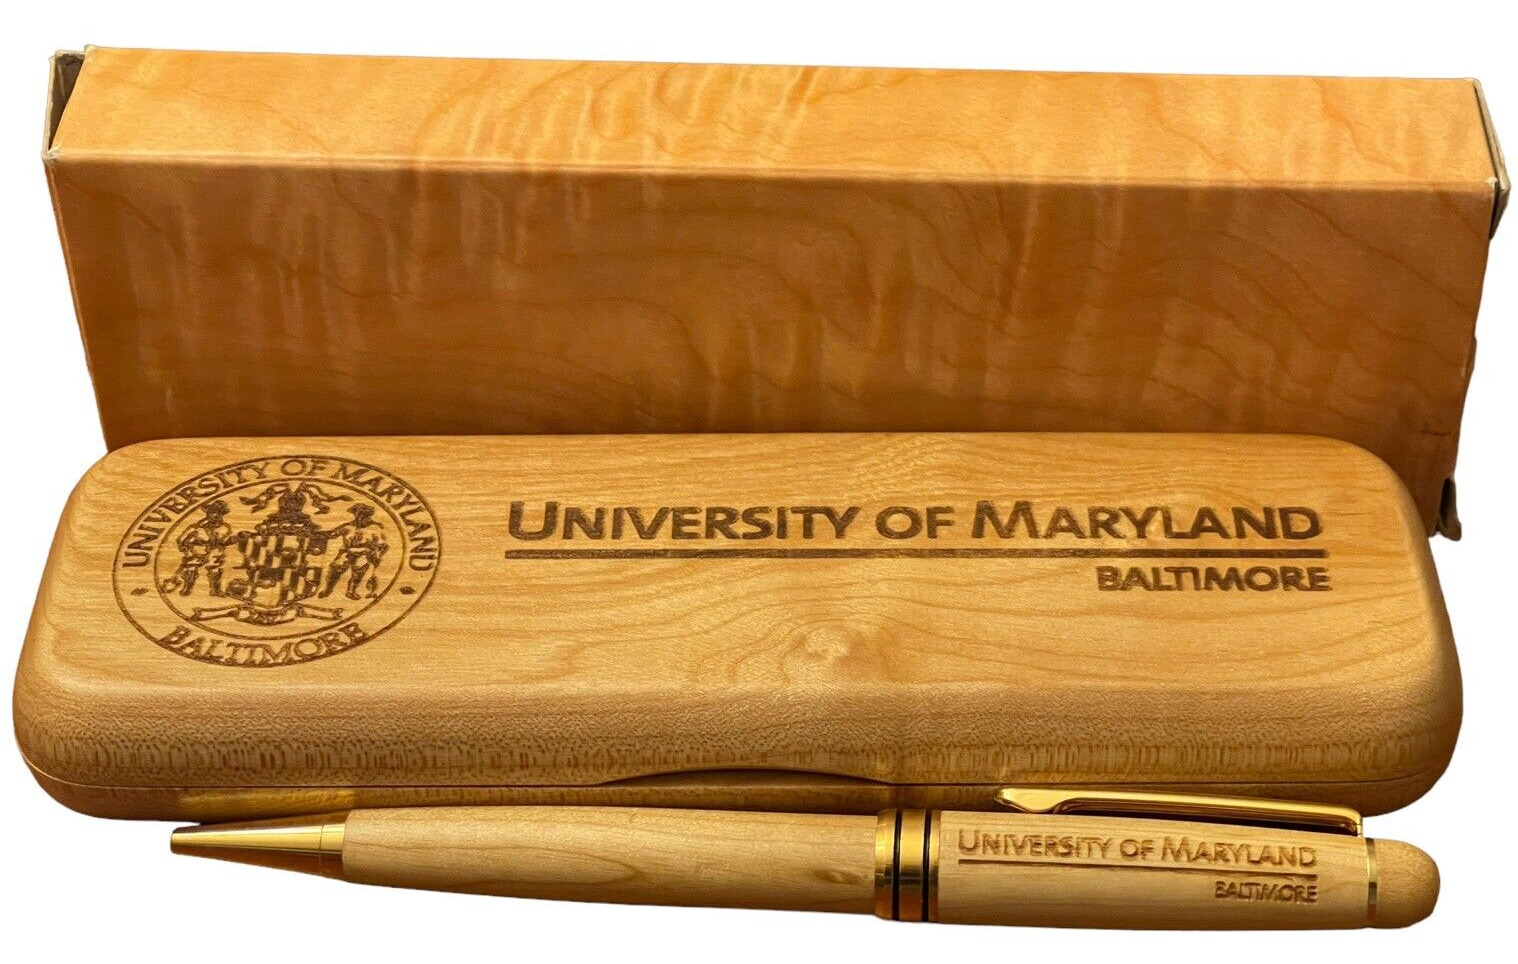 NEW University of Maryland Baltimore Engraved Wooden Pen Wooden Case